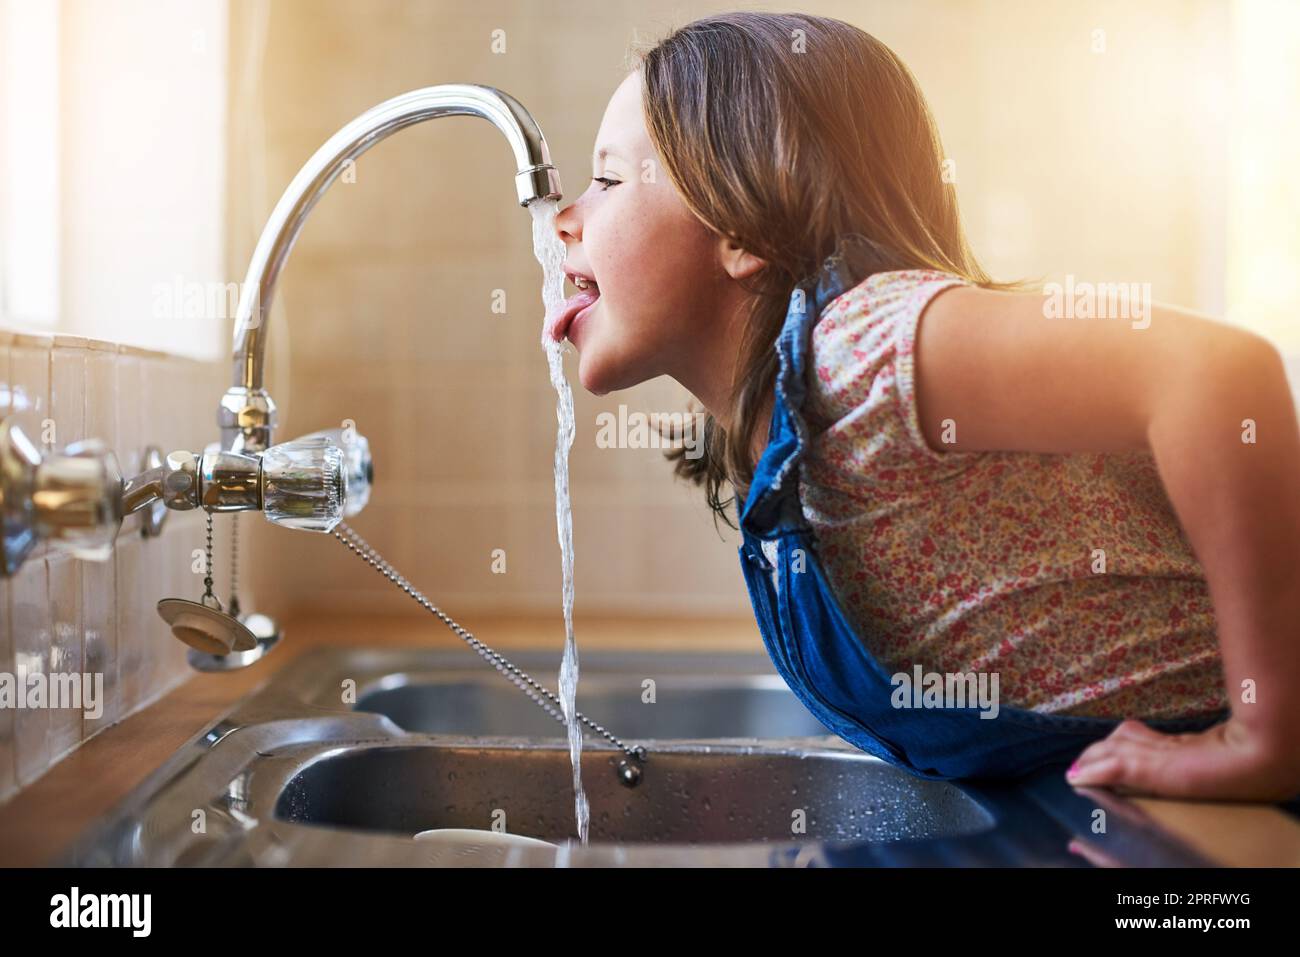 Its freshest from the faucet. a little girl drinking water directly from the kitchen tap at home. Stock Photo